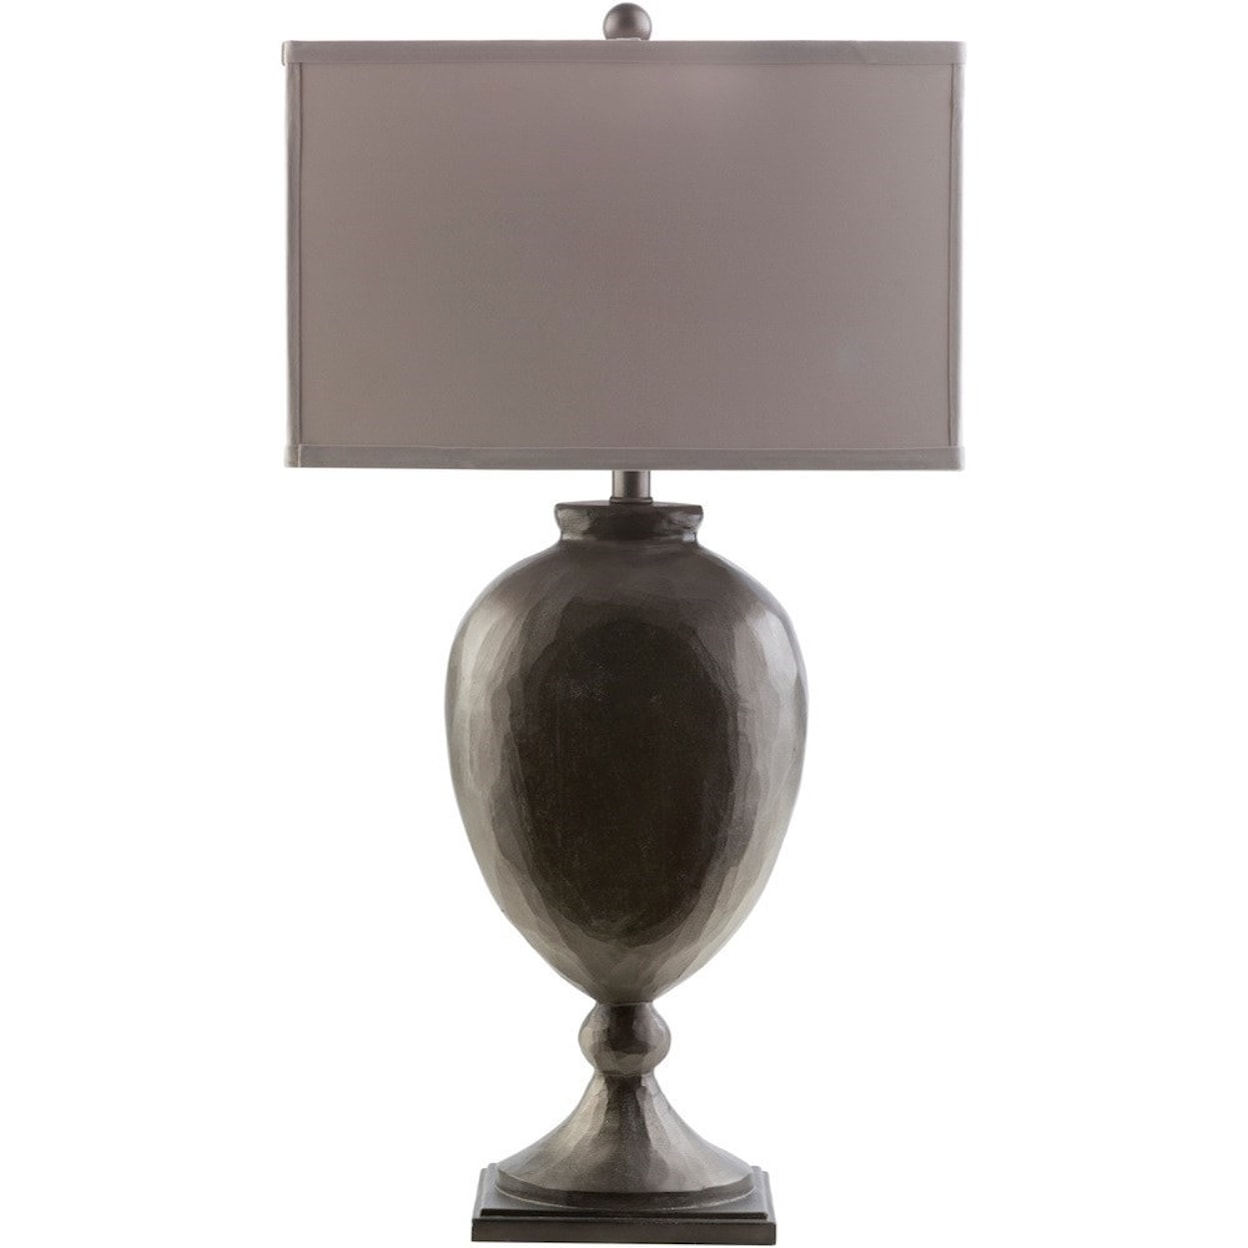 Surya Trotter Galvany Traditional Table Lamp